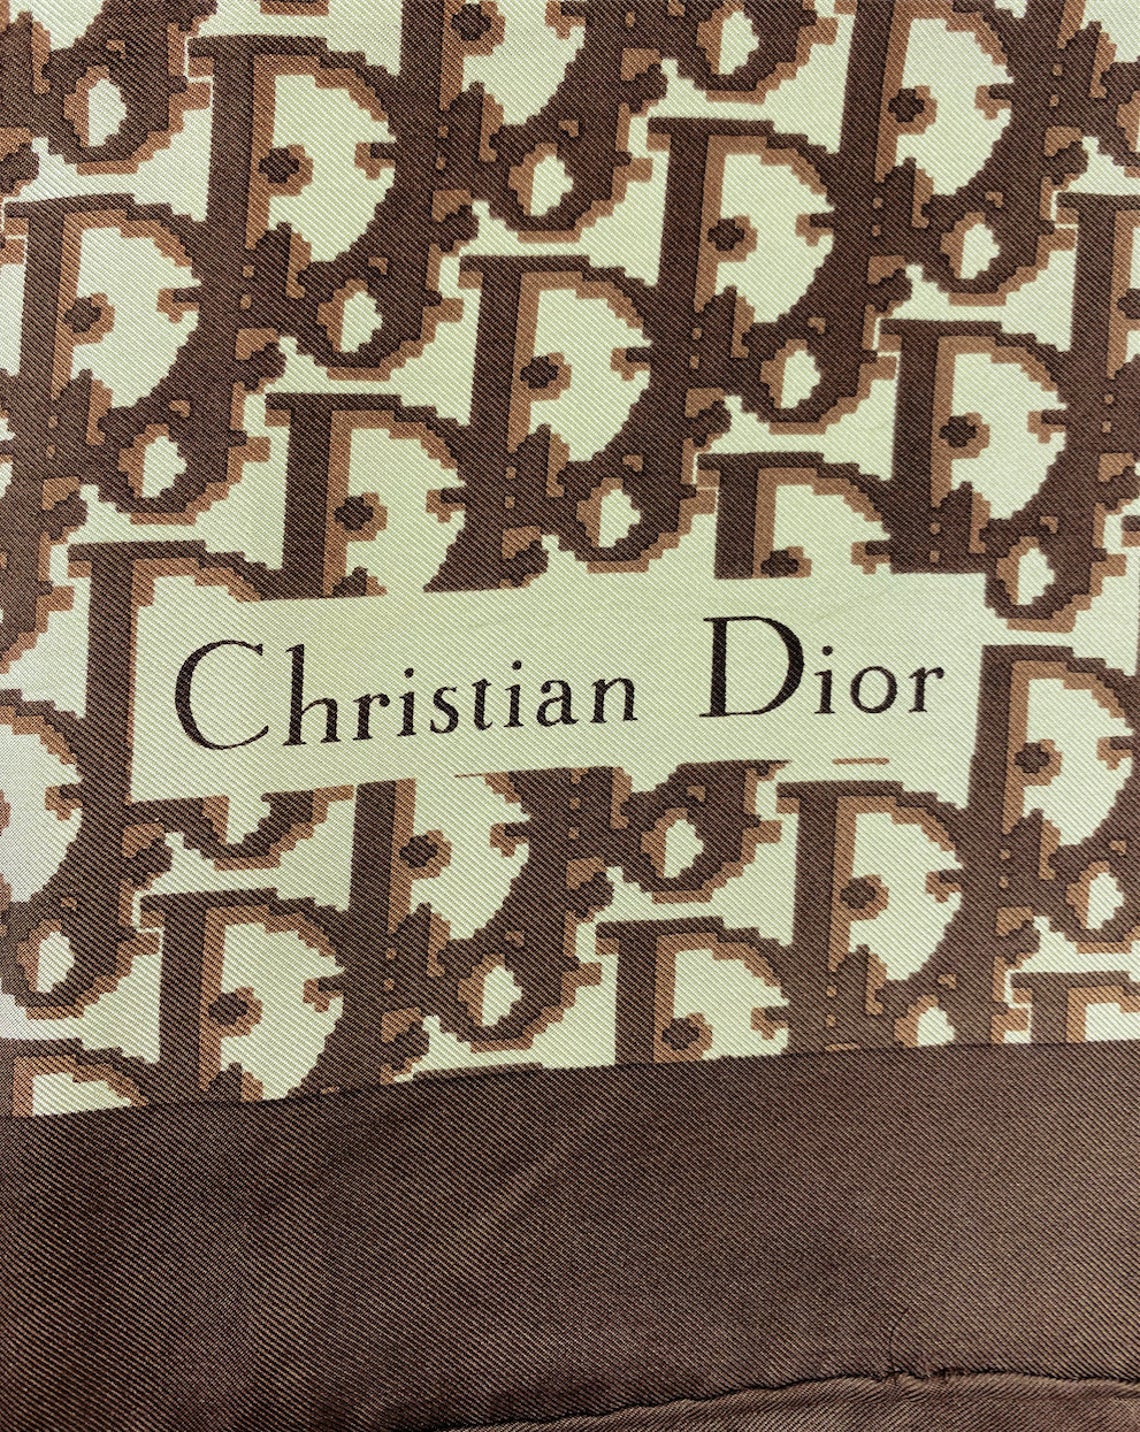 Fruit Vintage Christian Dior oblique print silk scarf in brown. Features a bold graphic Dior logo print and hand finished rolled hem edging.